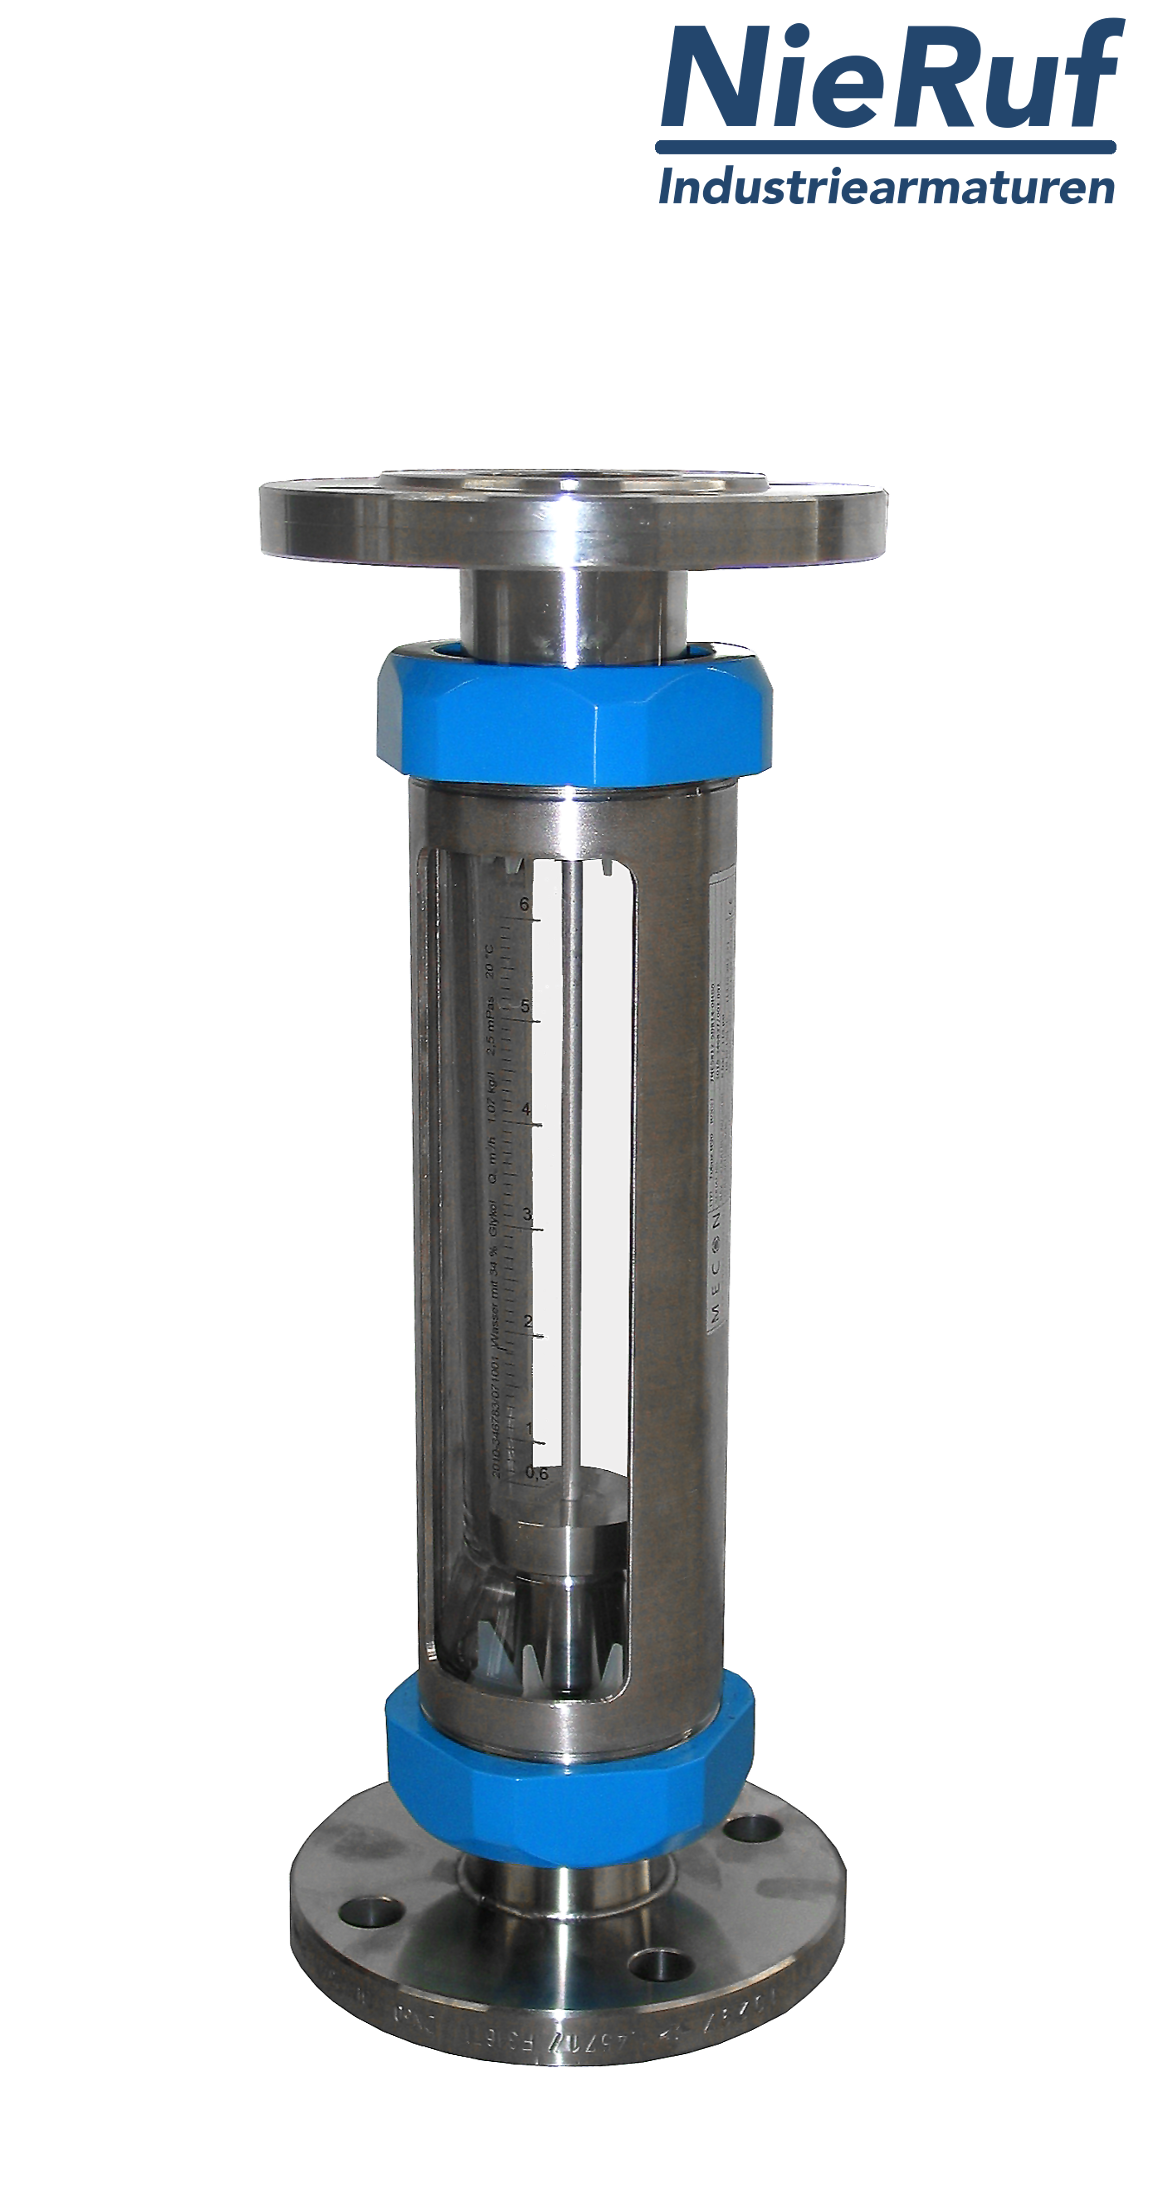 Variable area flowmeter stainless steel + borosilicate flange DN10 0.5 - 5.0 l/h water FKM